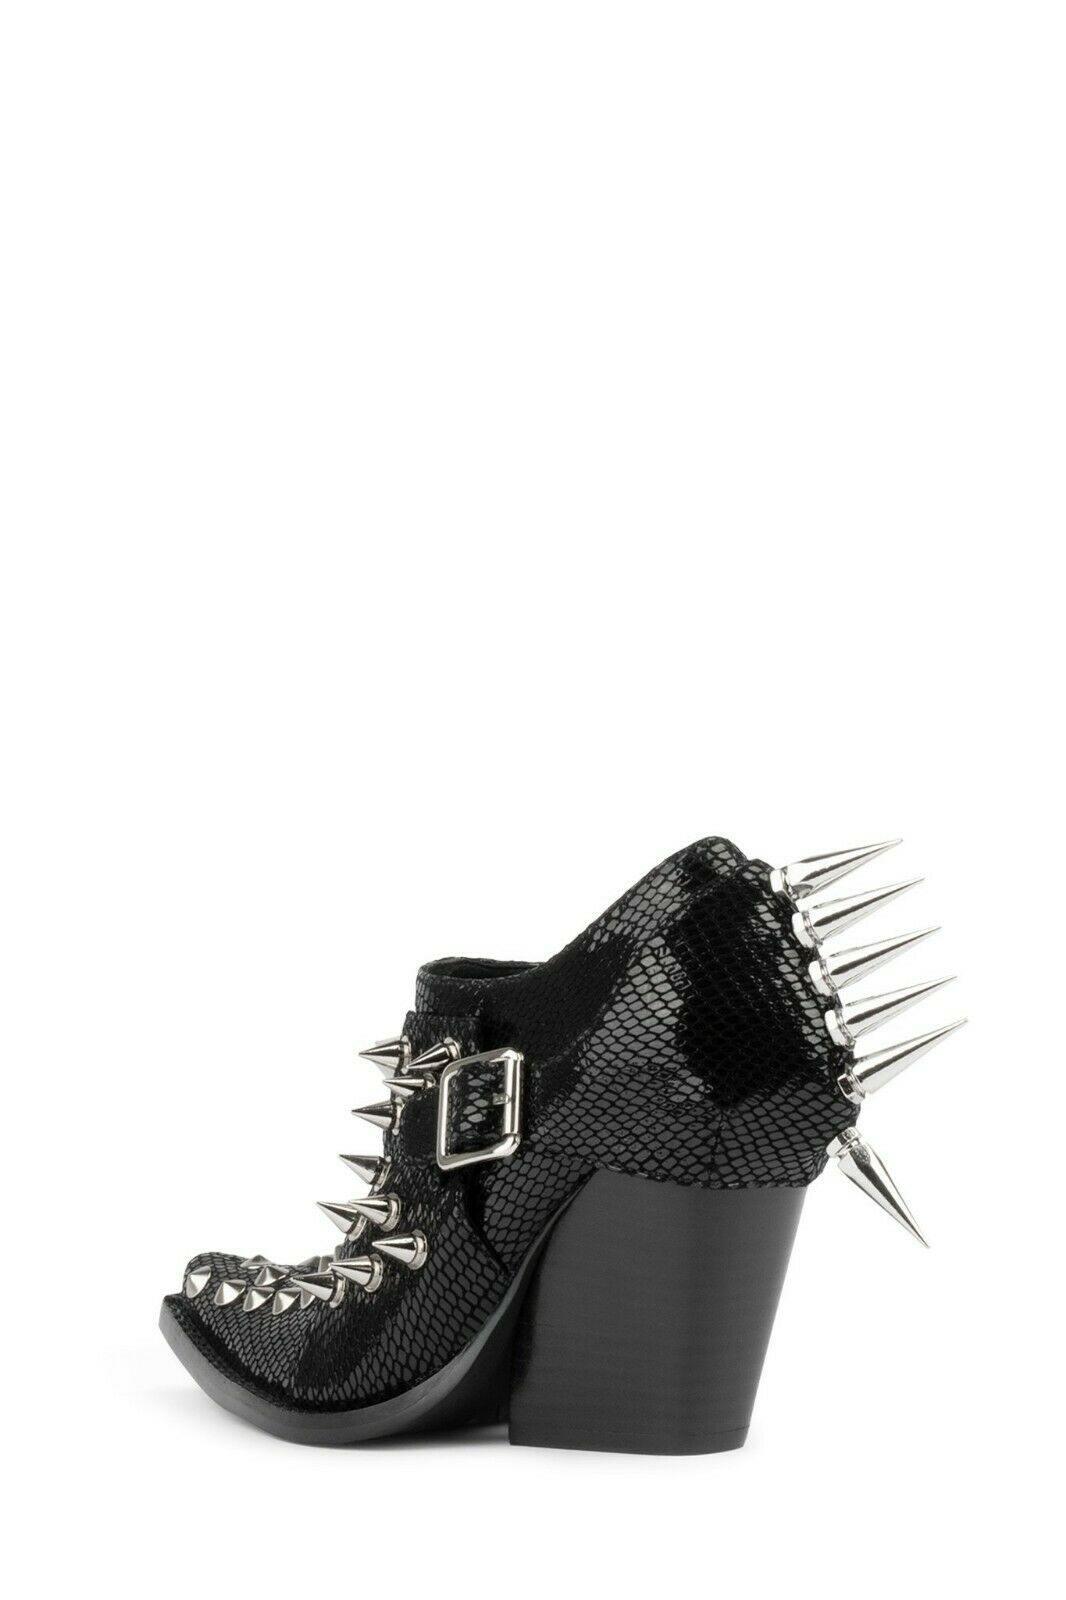 Jeffrey Campbell Womens Western Heeled Spikes Leather Black Booties Shoes US 6 - SVNYFancy